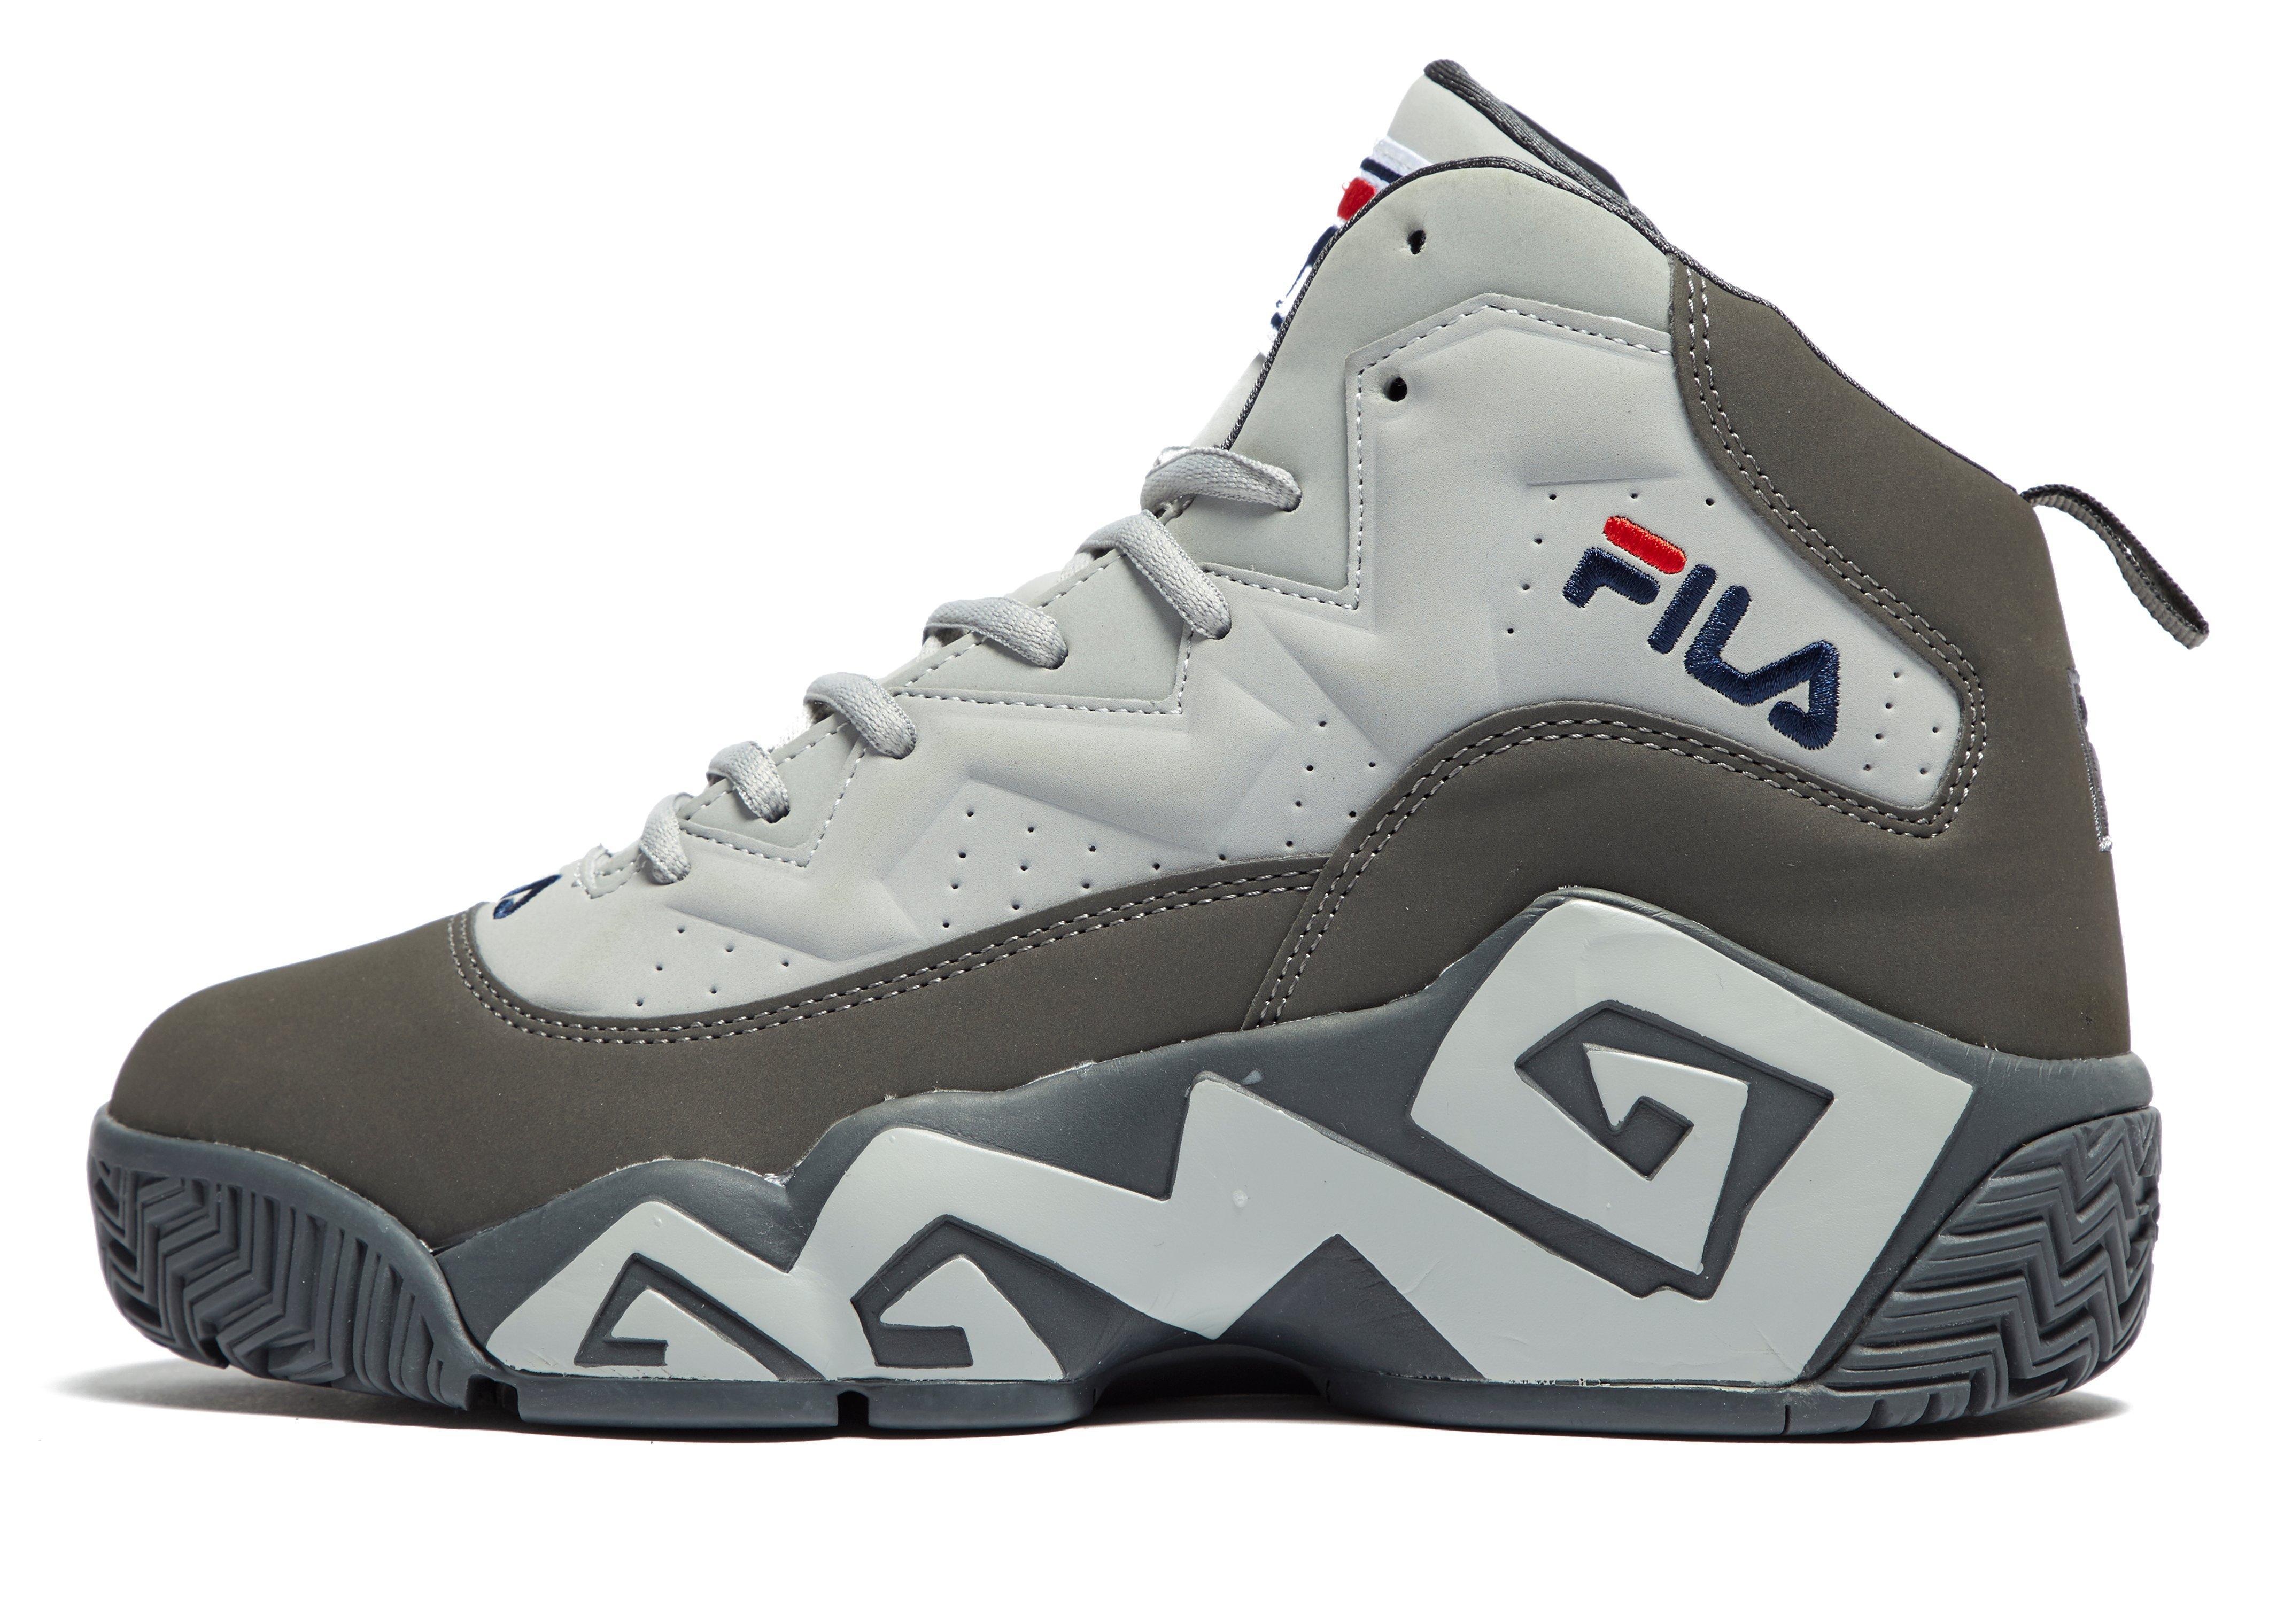 Fila Leather Mb in Grey (Gray) for Men - Lyst